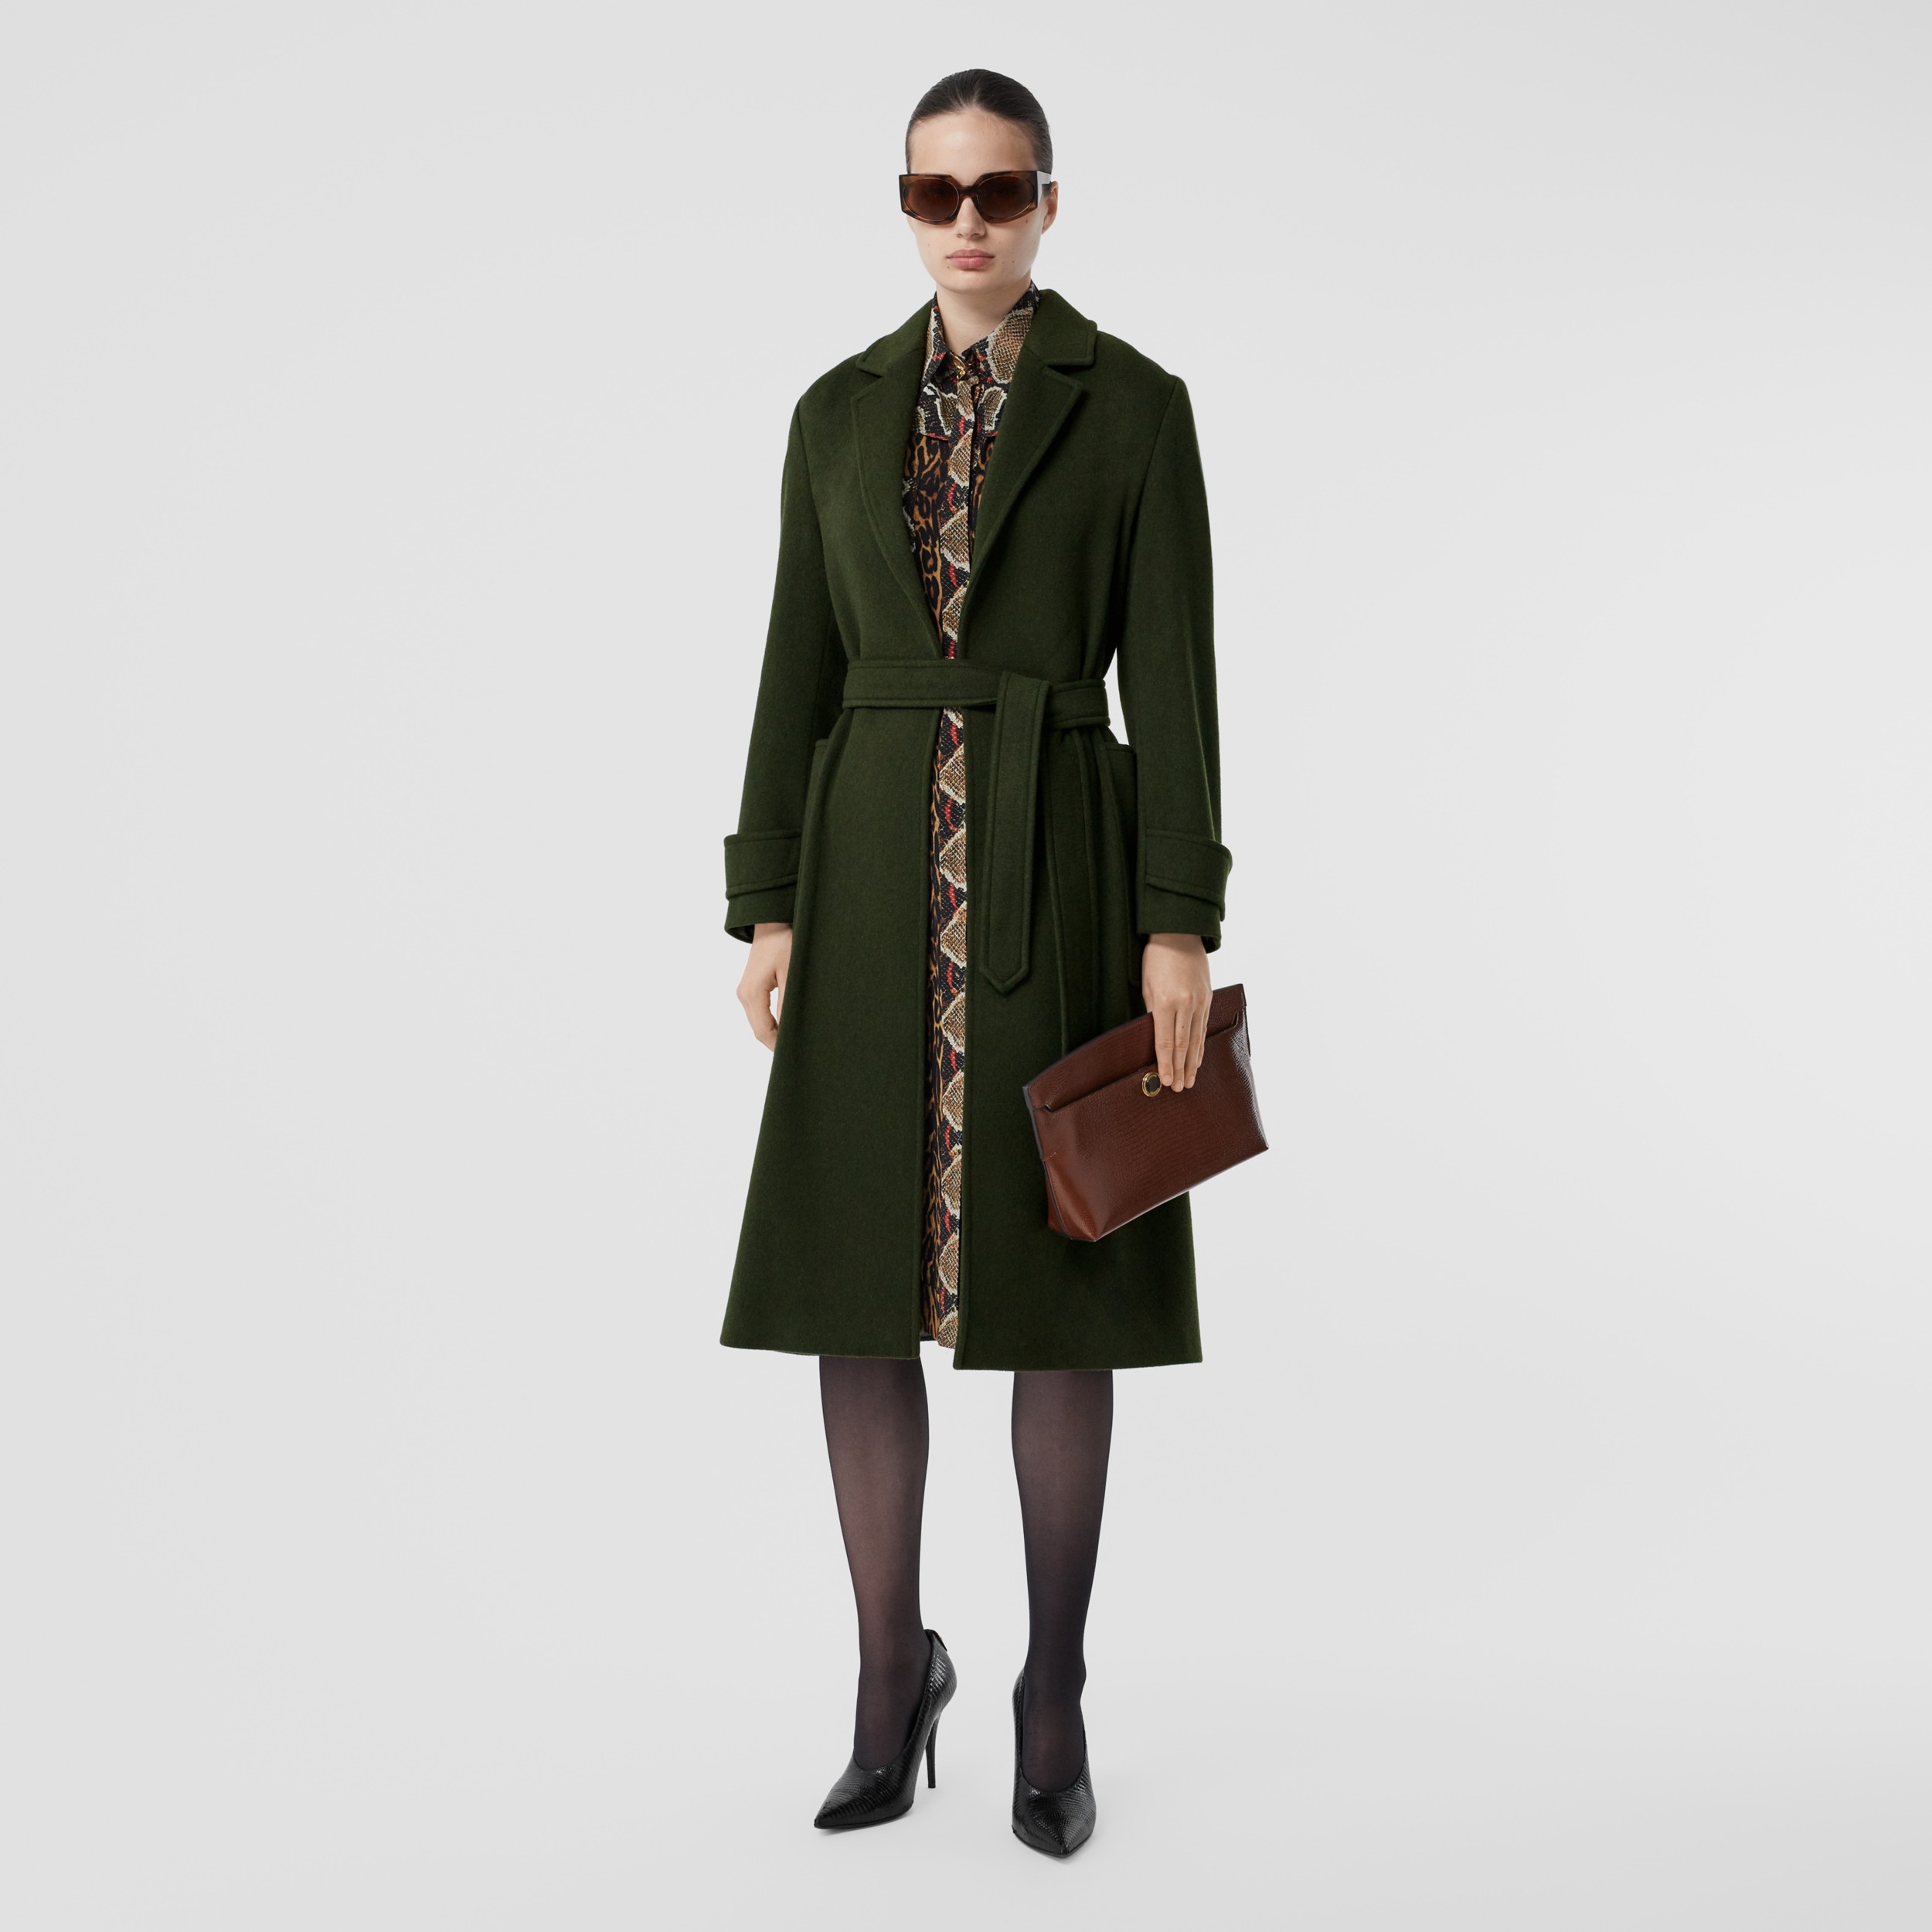 Cashmere Wrap Coat in Forest Green - Women | Burberry United States